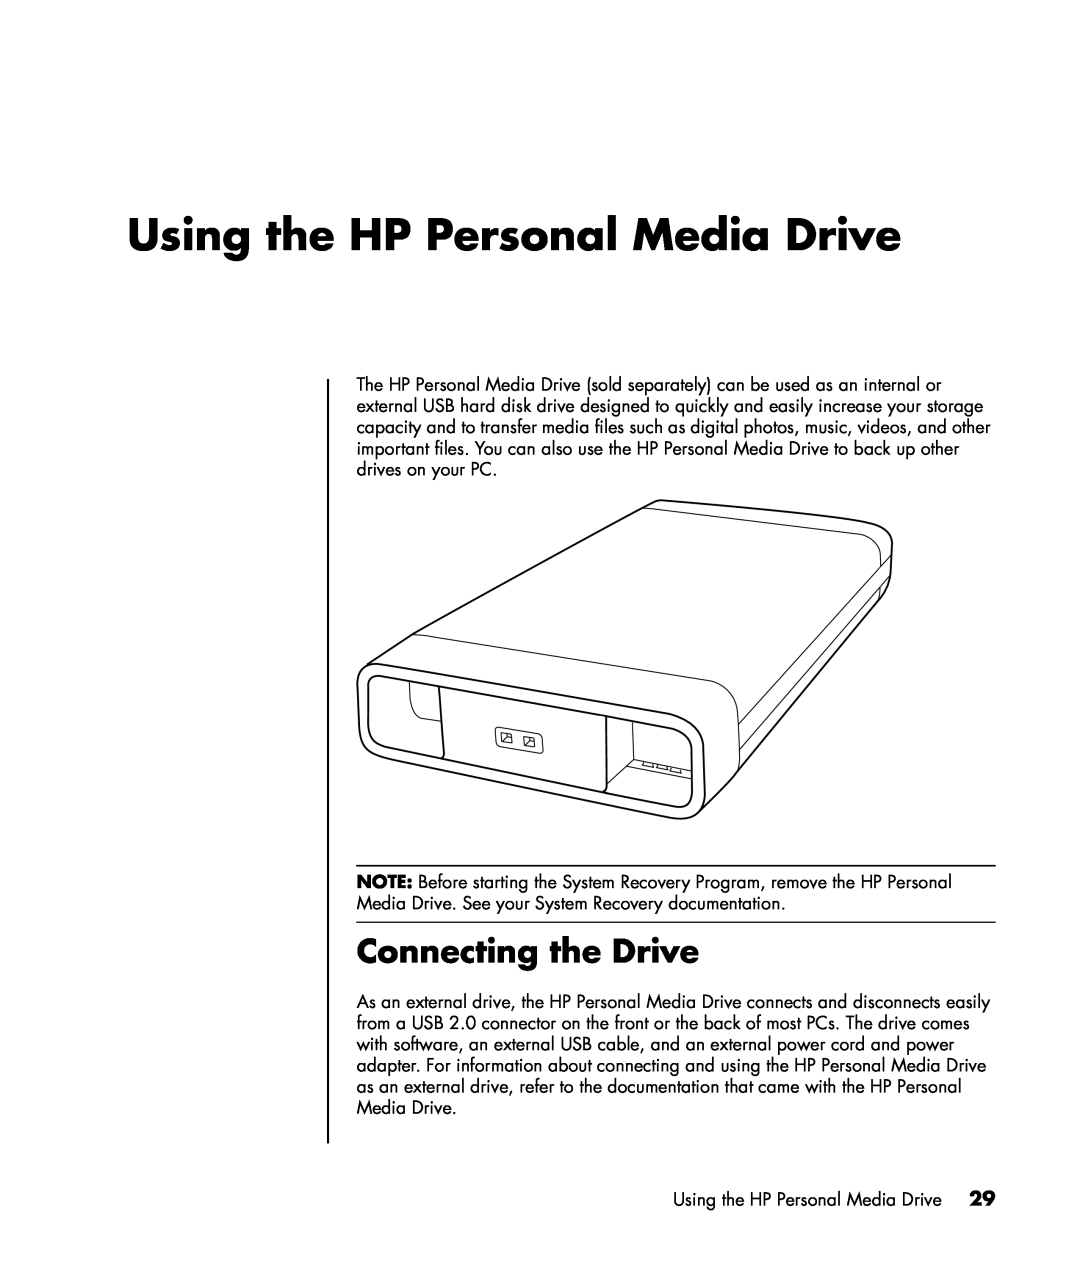 HP SR1503WM, SR1520NX, SR1519X, SR1522X, SR1514NX, SR1510NX, SR1511NX Using the HP Personal Media Drive, Connecting the Drive 